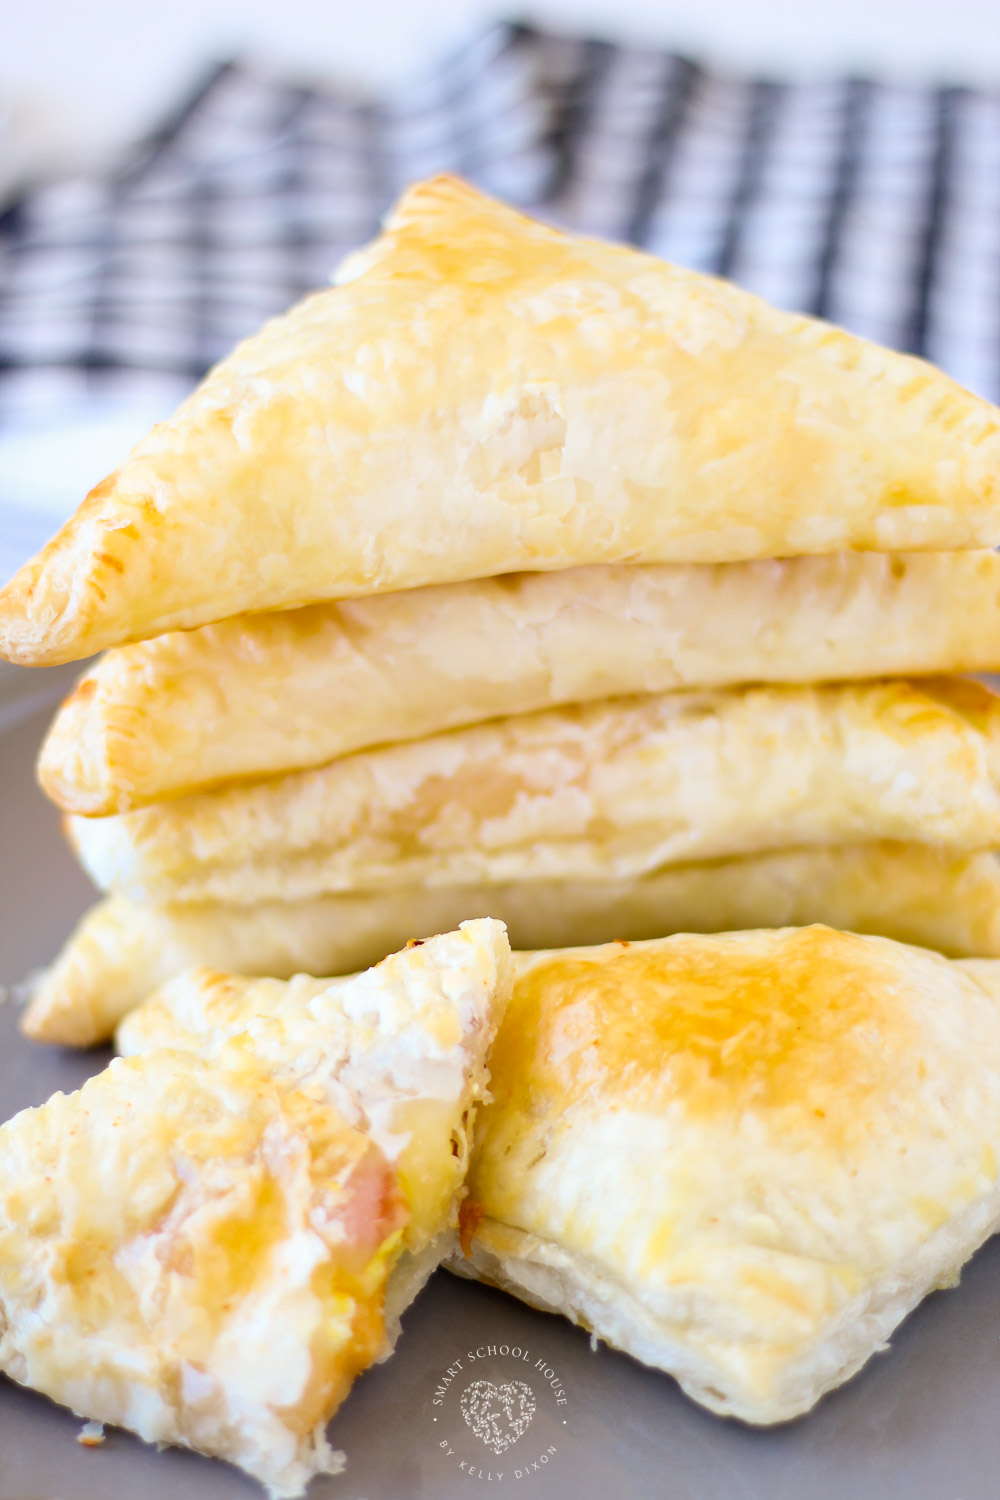 Bacon and Egg Breakfast Pockets Made with Puff Pastry Dough. These Breakfast Pockets are great to make ahead and can be frozen. Kids love them! A complete breakfast inside a tidy pocket of dough. DELICIOUS!